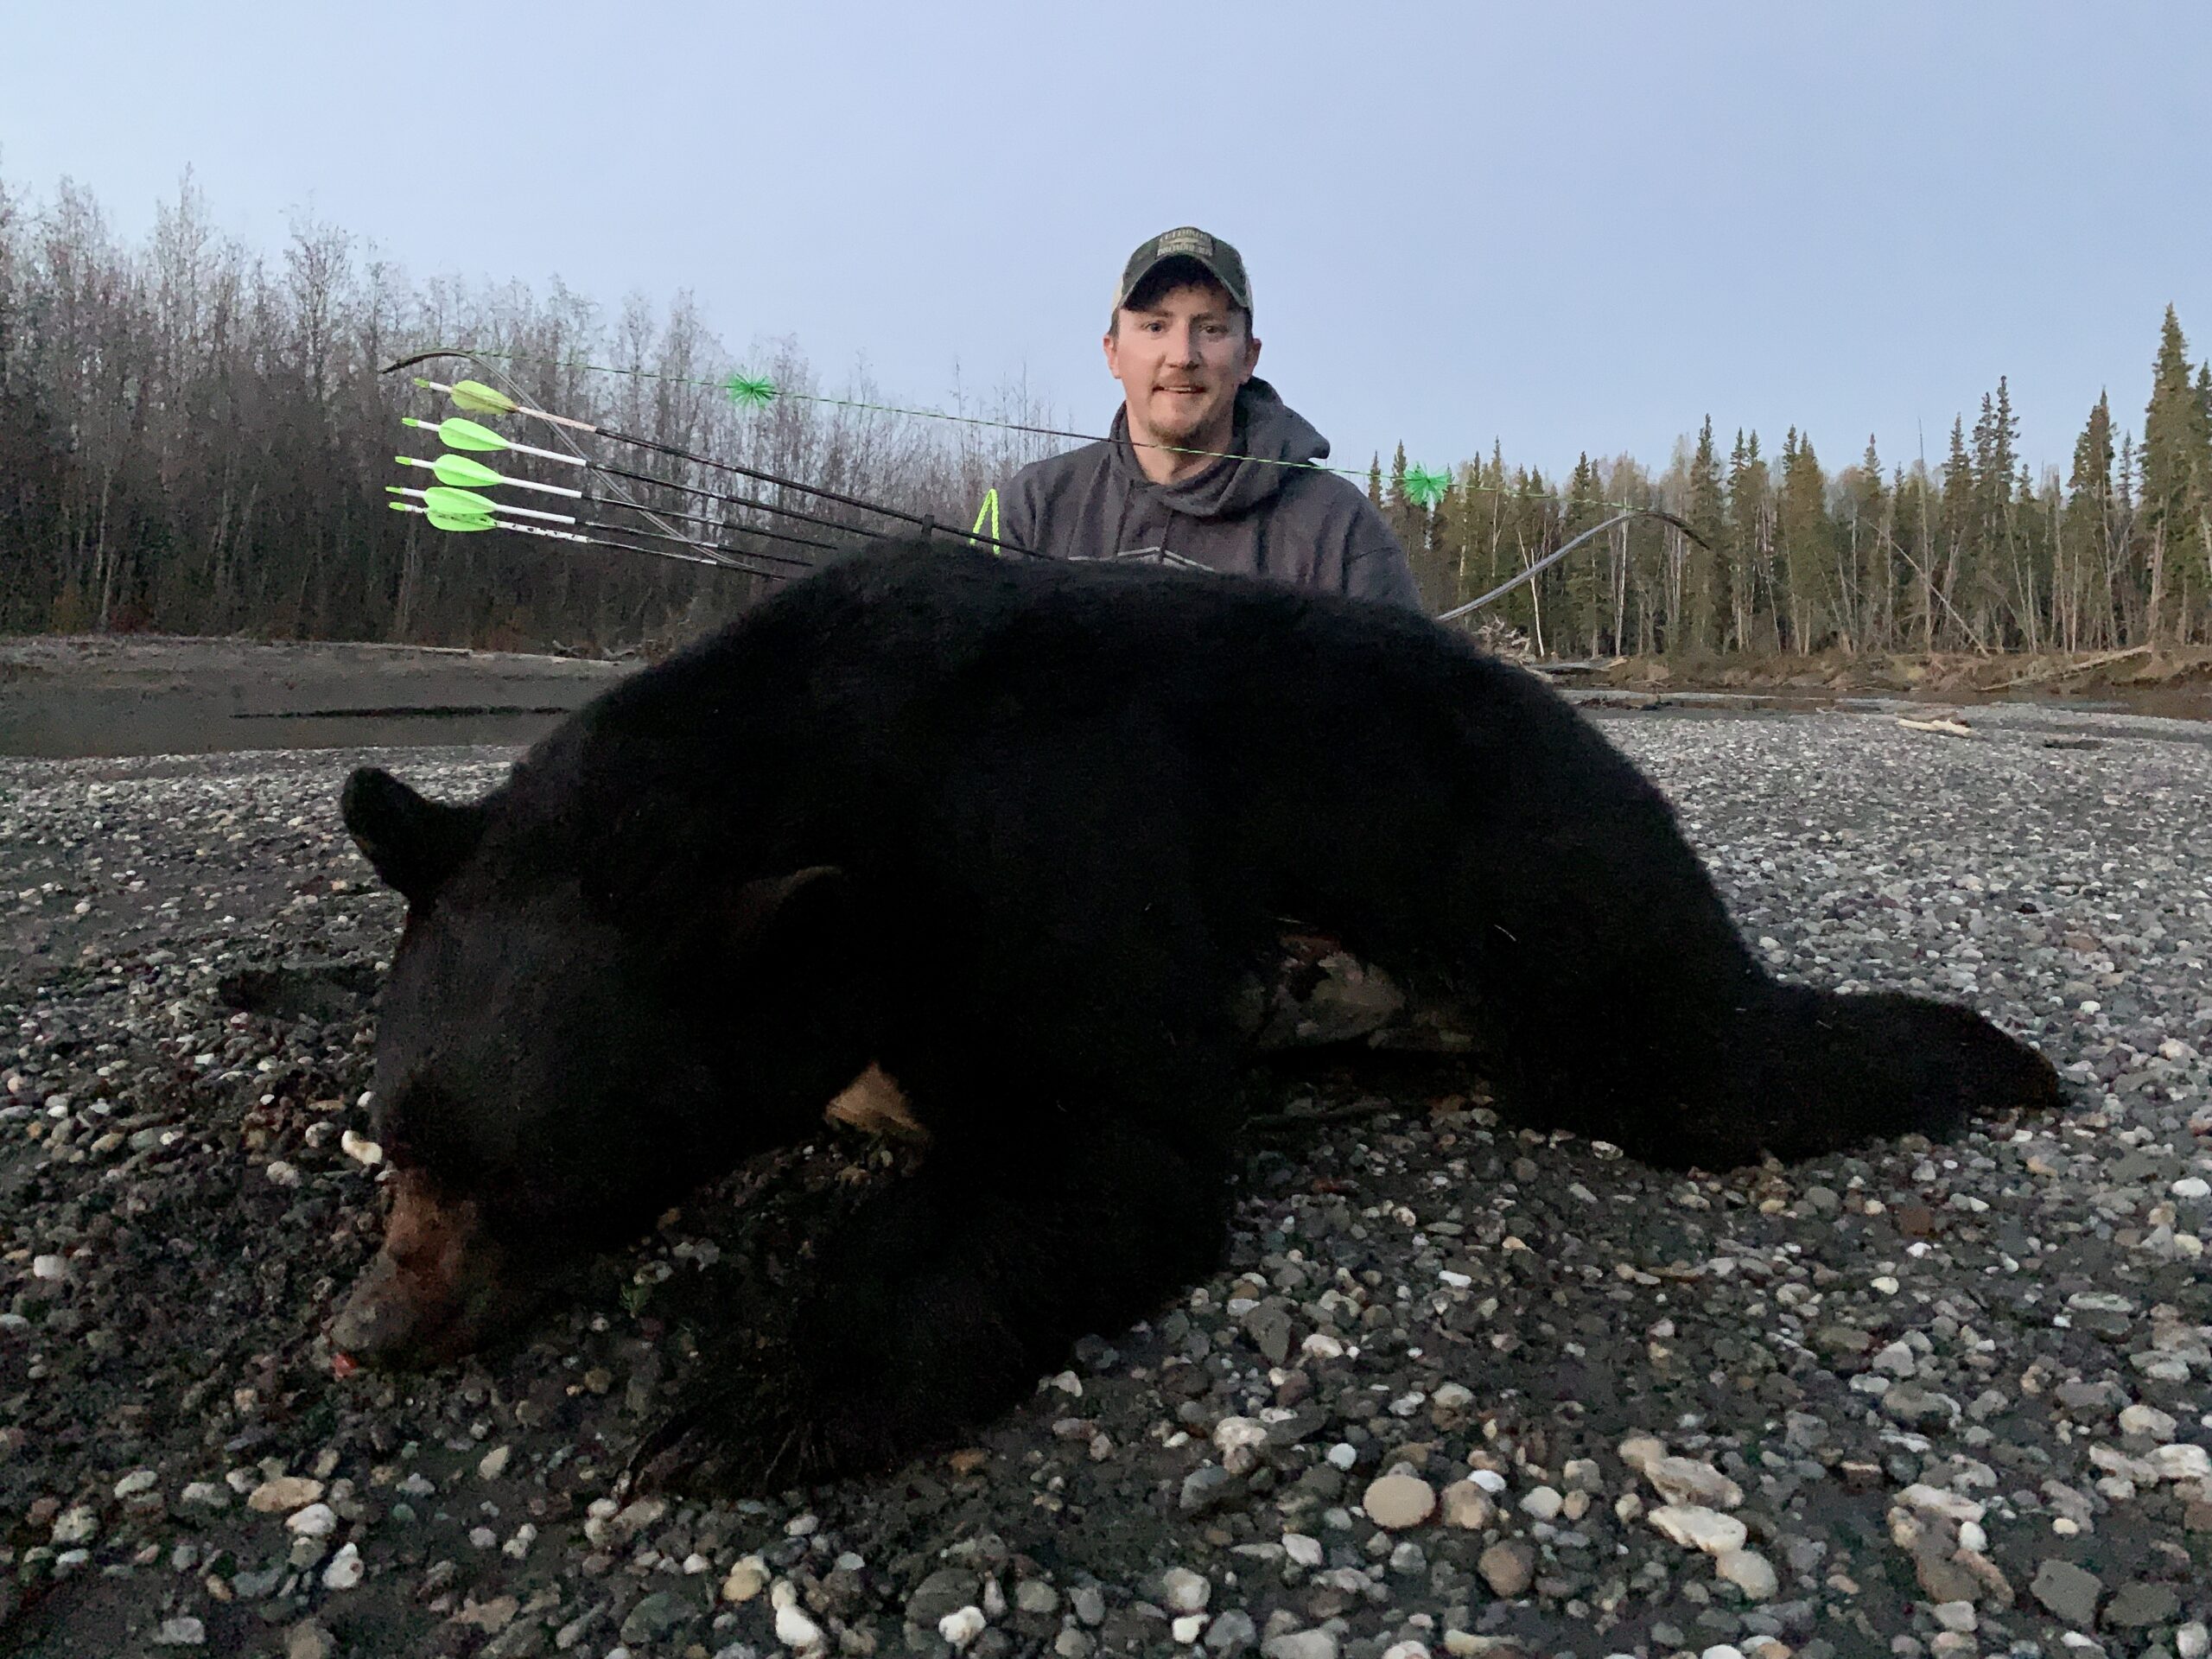 Freel with a black bear